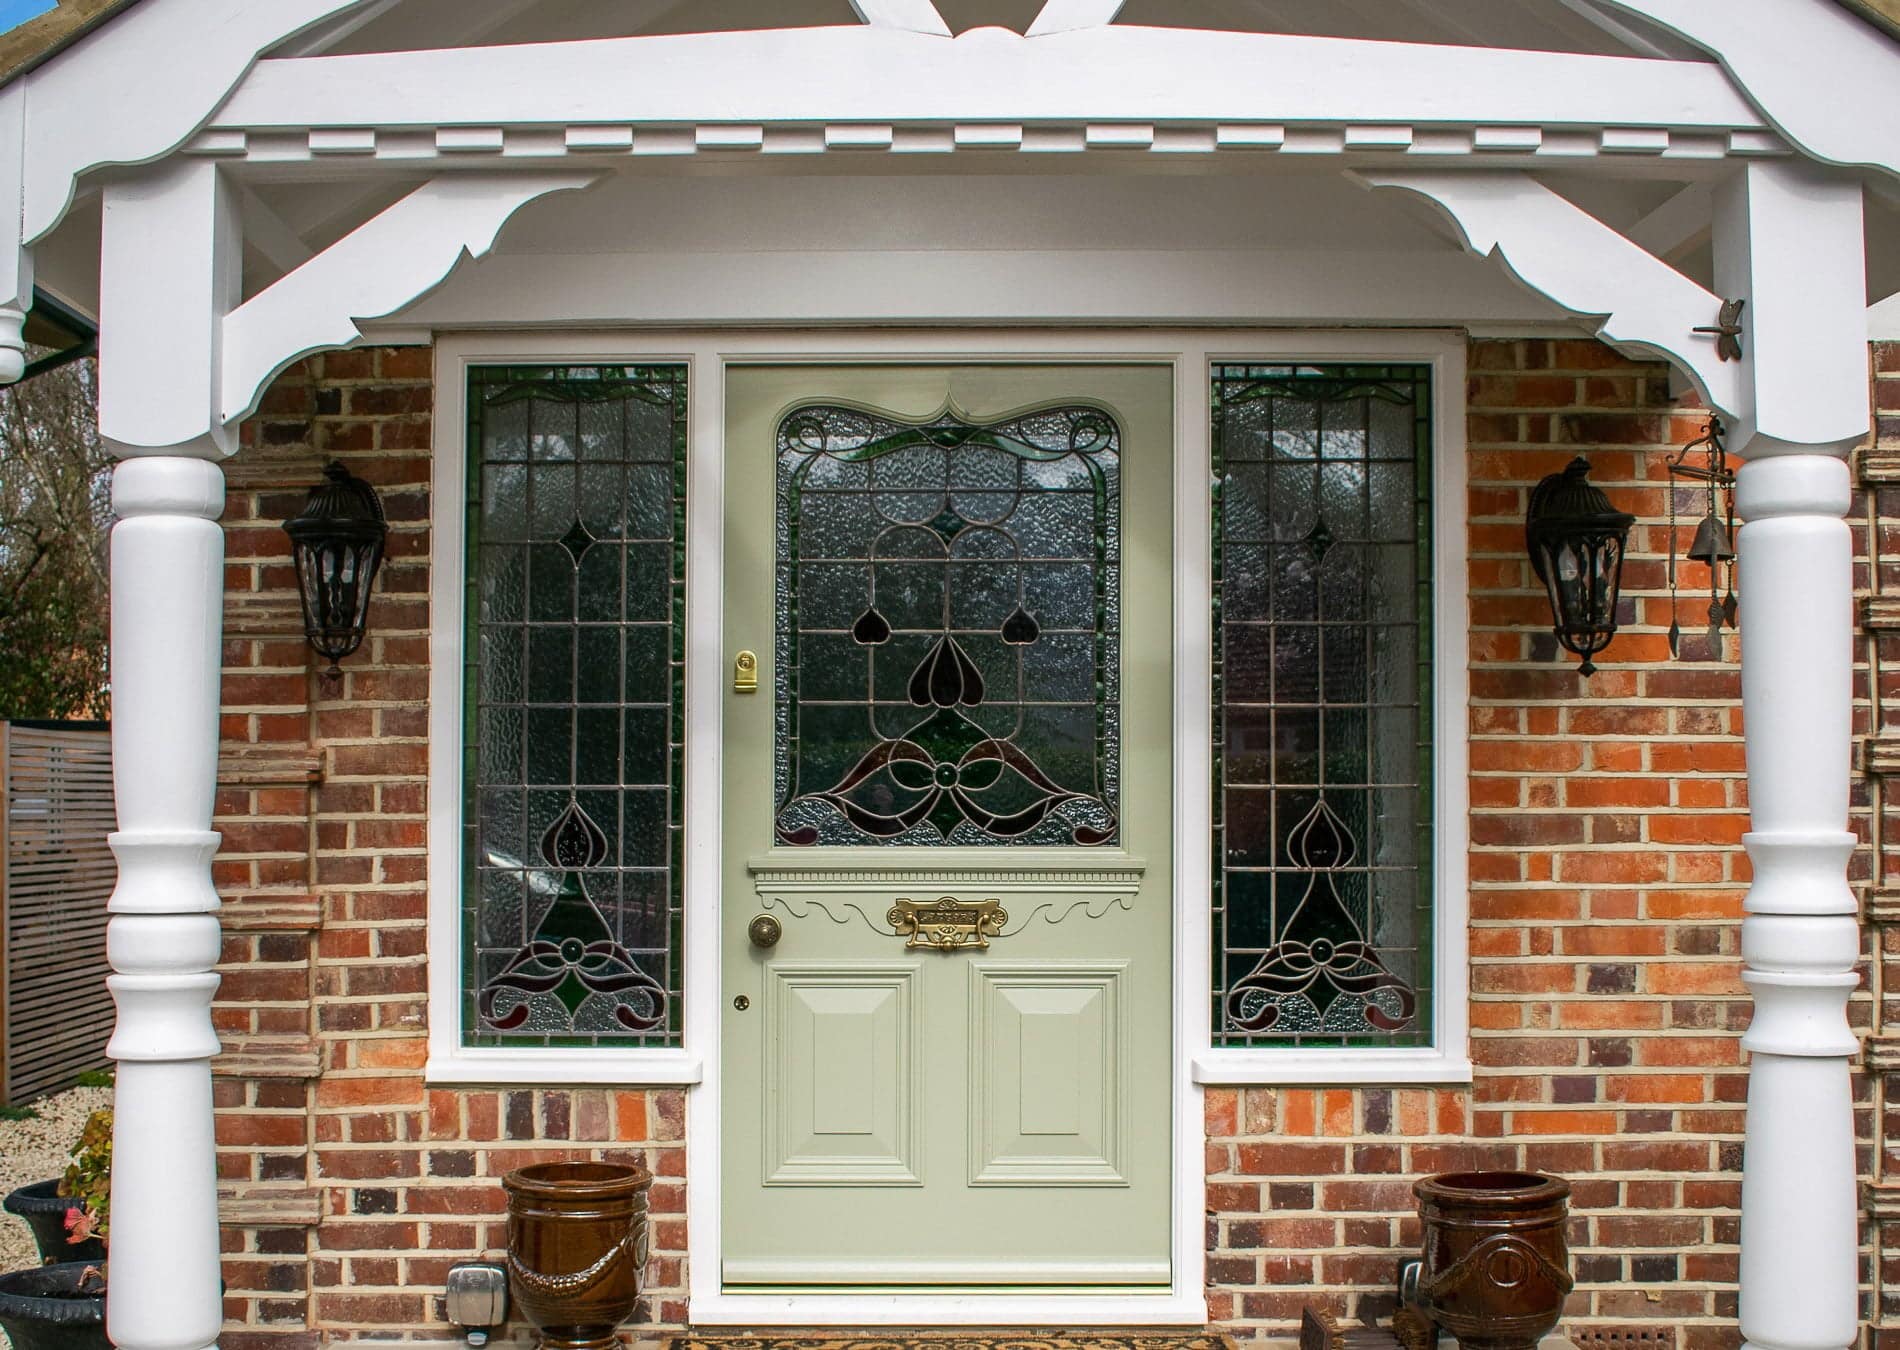 bespoke Edwardian front door with stained glass. Antique brass door furniture